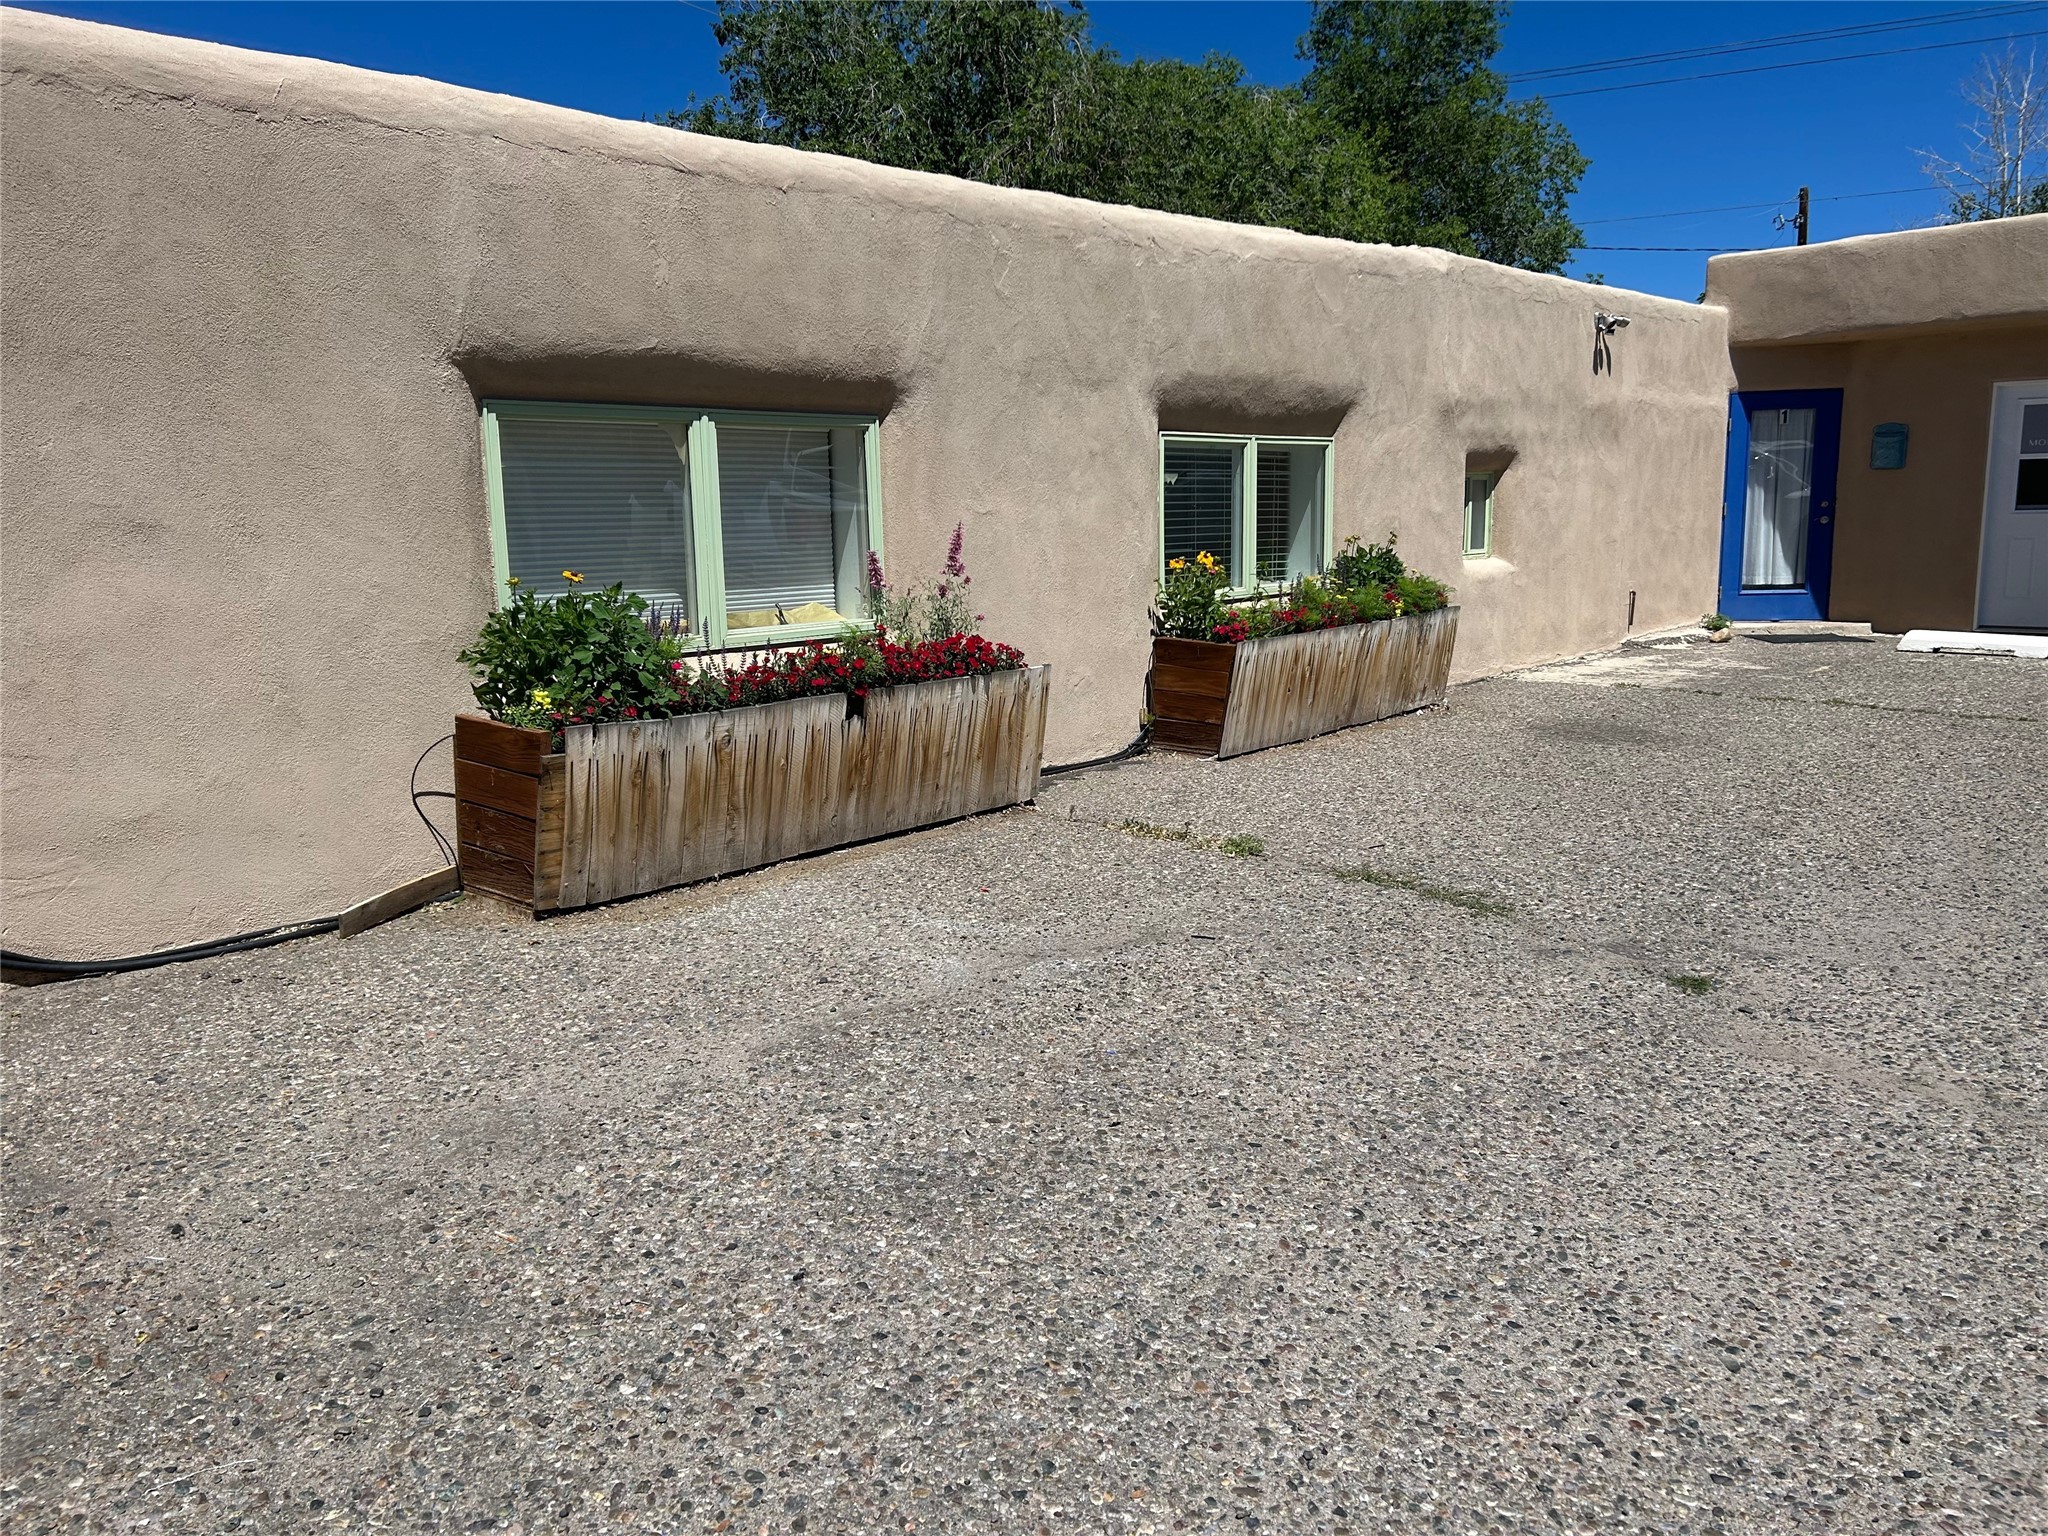 501 Franklin 14, Santa Fe, New Mexico 87501, ,Commercial Lease,For Rent,501 Franklin 14,202338700